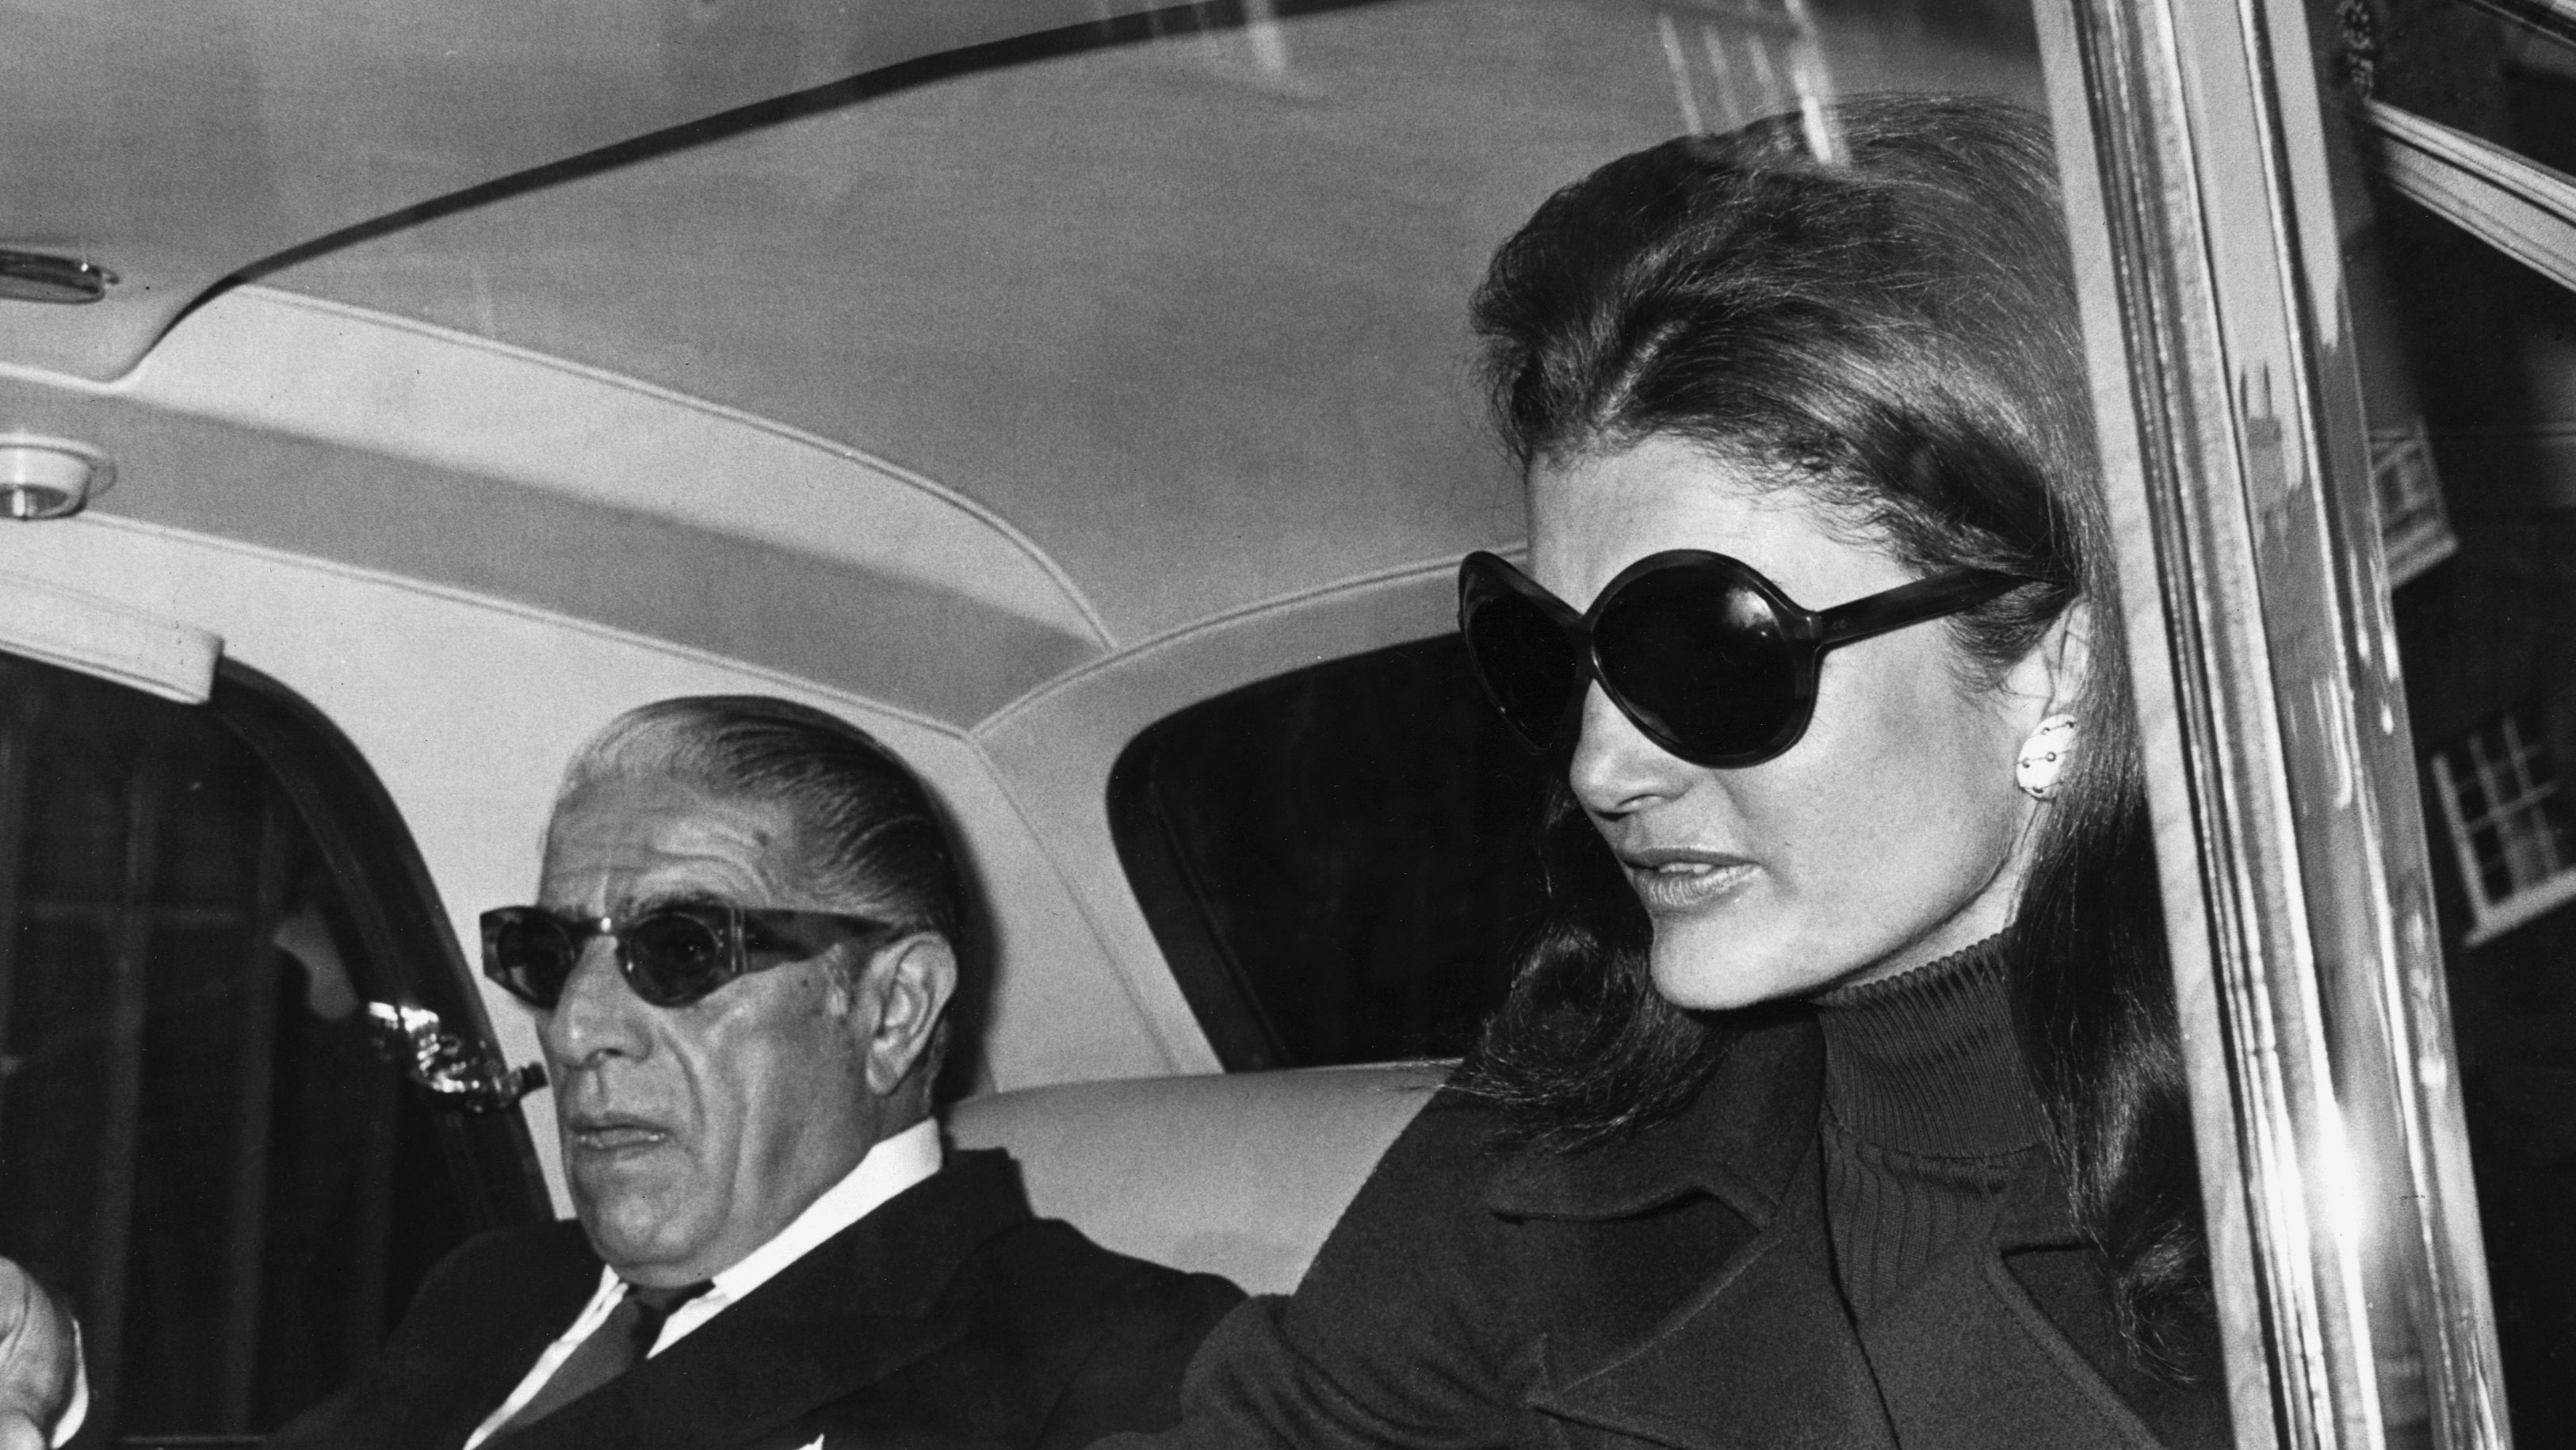 Jacqline Nude Image - How Jackie Kennedy's Second Marriage Forever Changed Media and Porn -  InsideHook